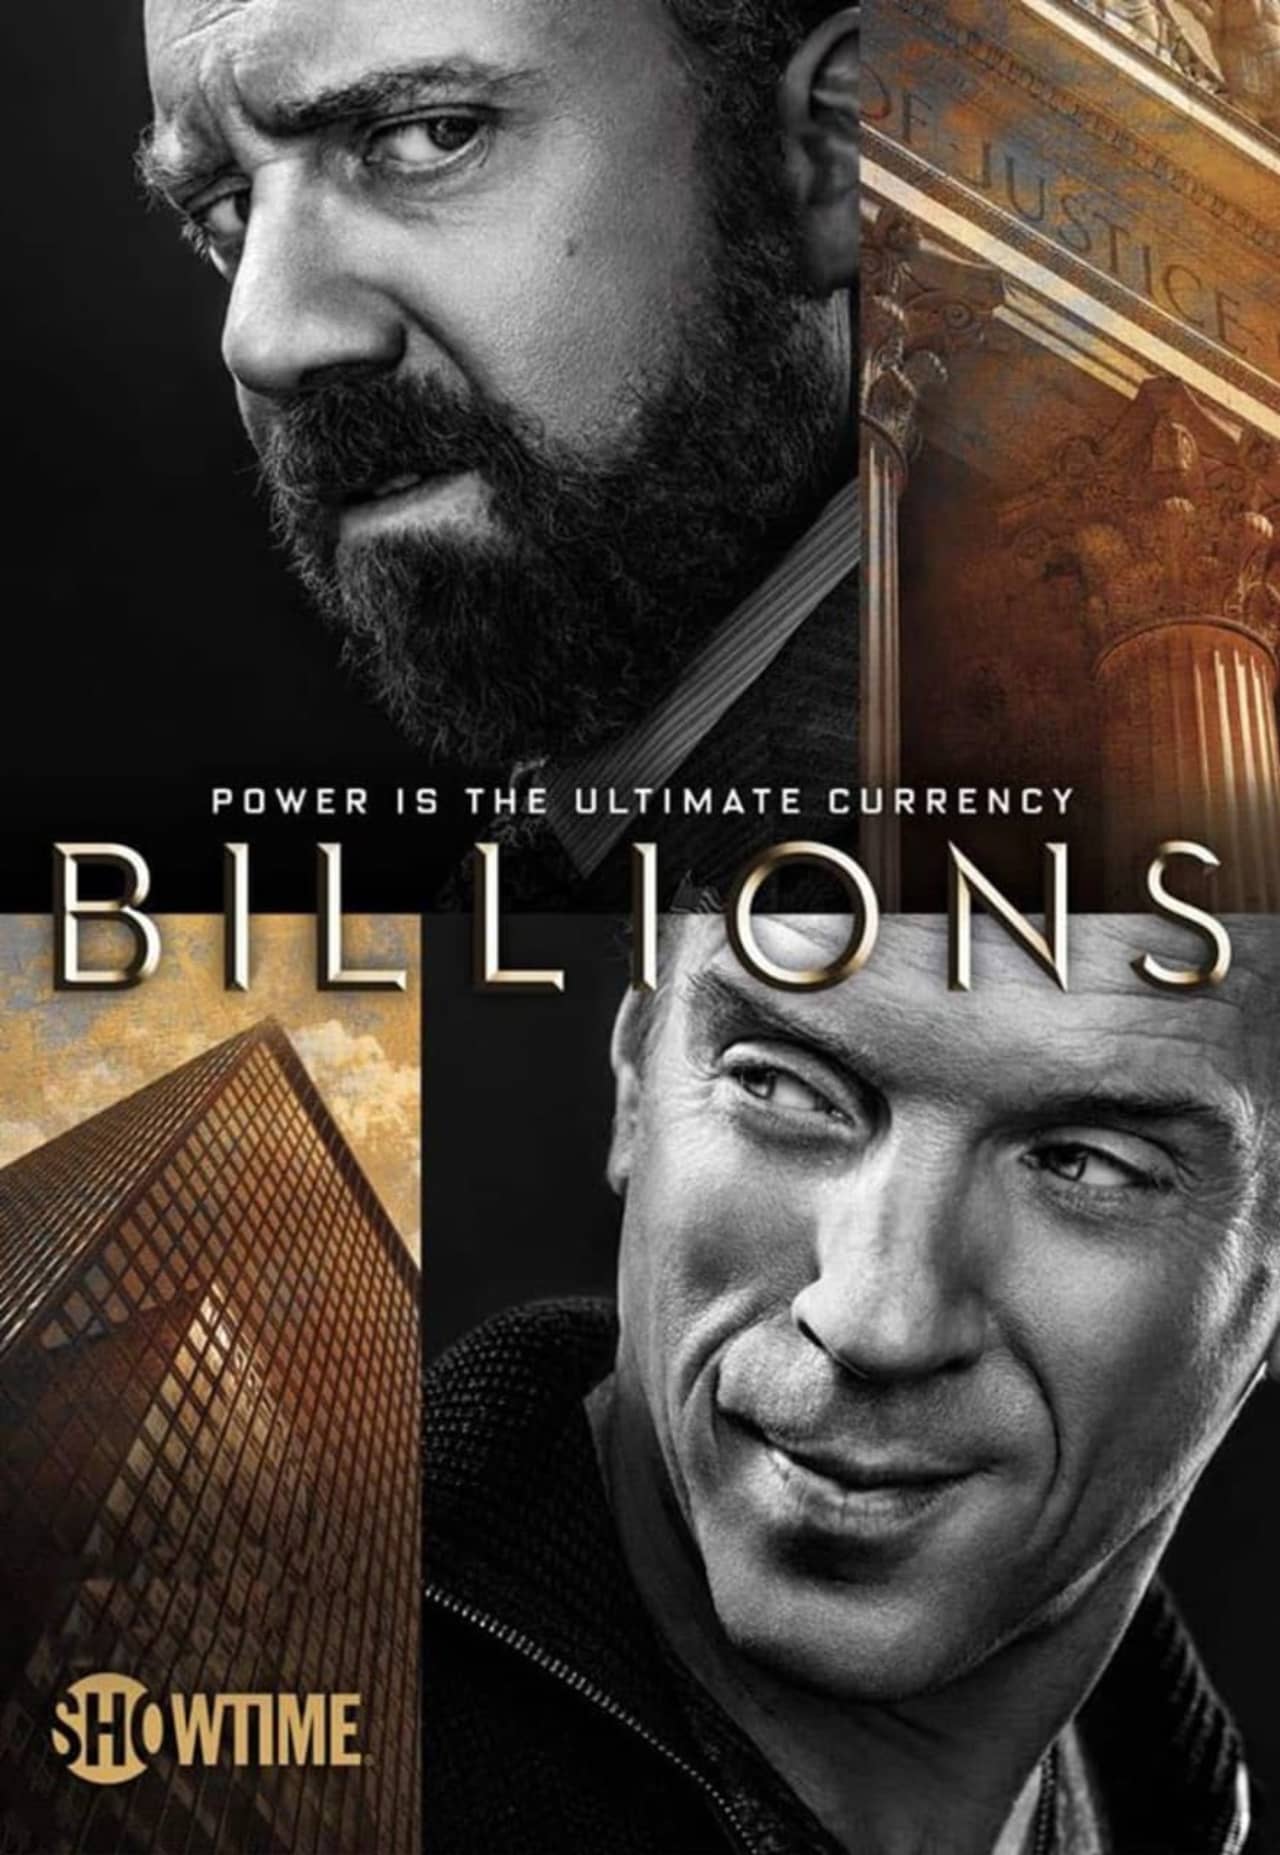 Casting agency looking for local extras to star in the hit Showtime series 'Billions.'